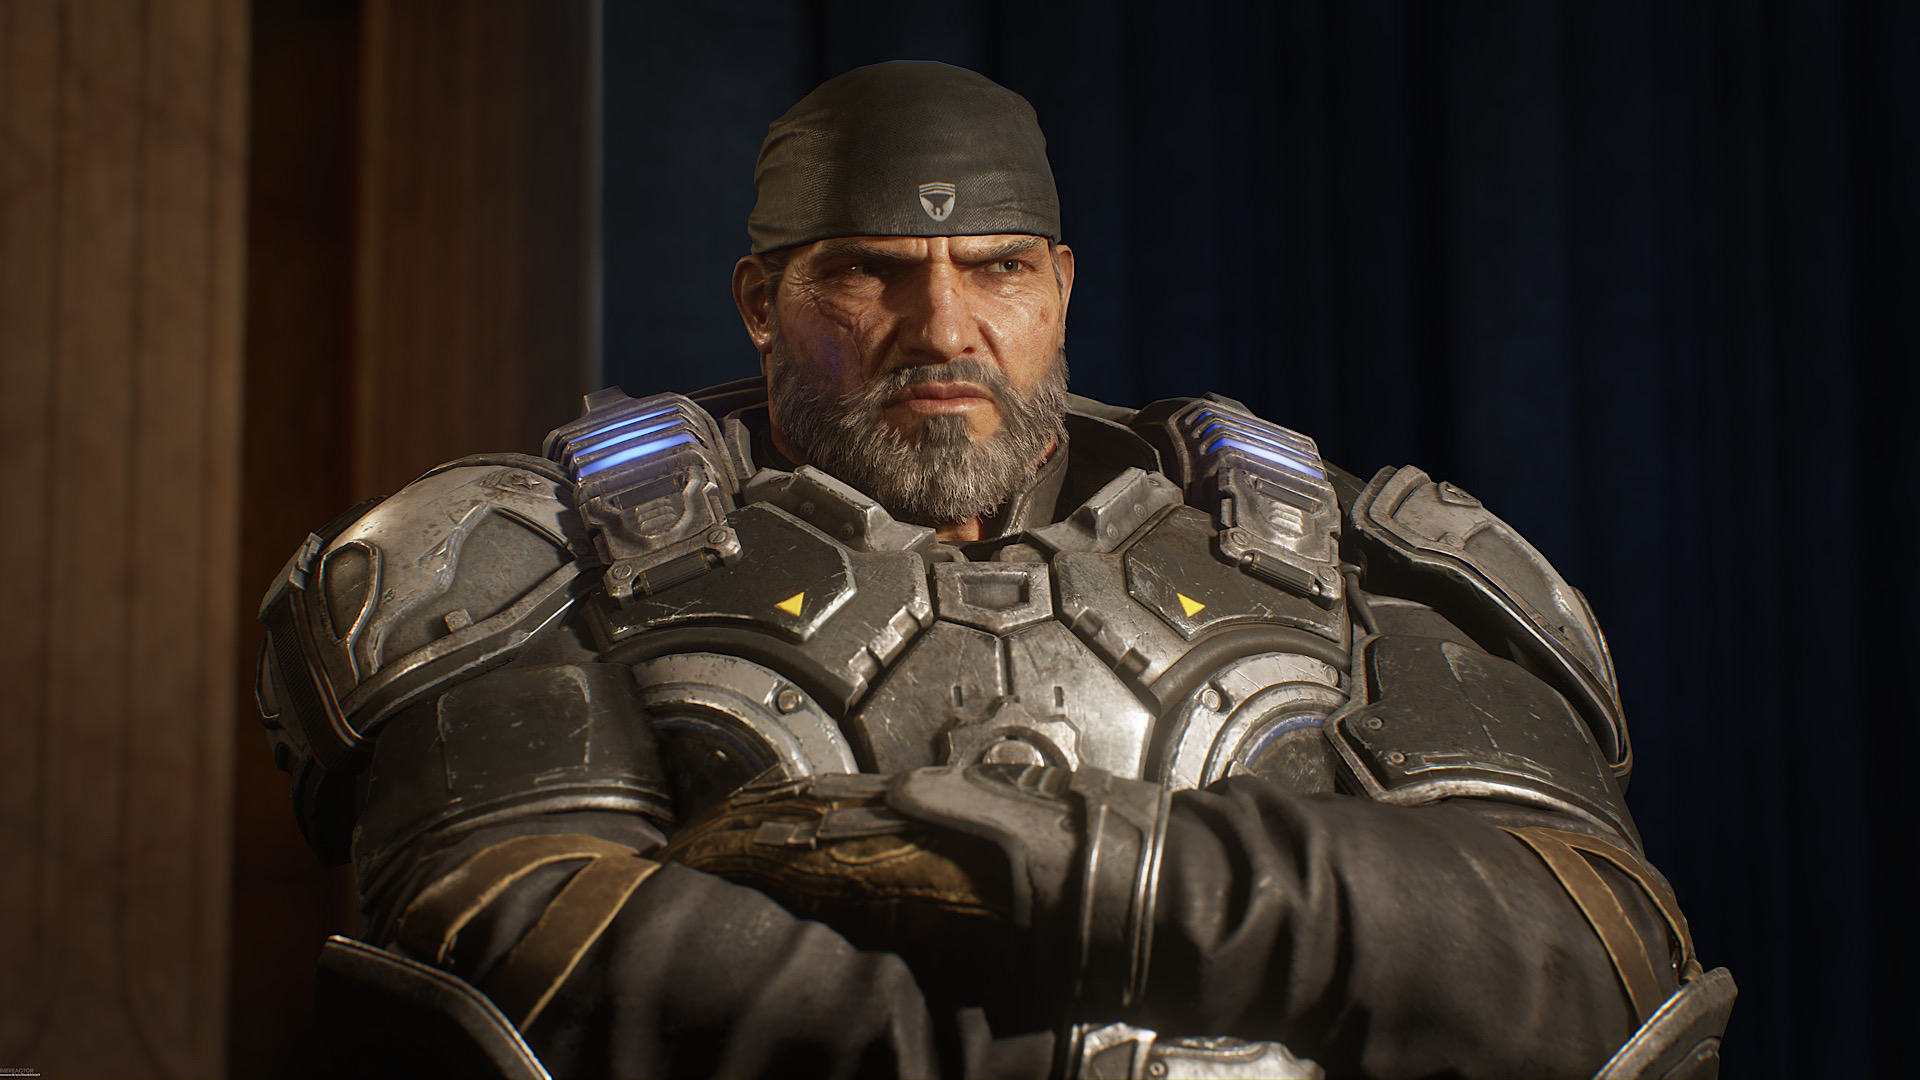 Gears of War 4 Graphics & Performance Guide